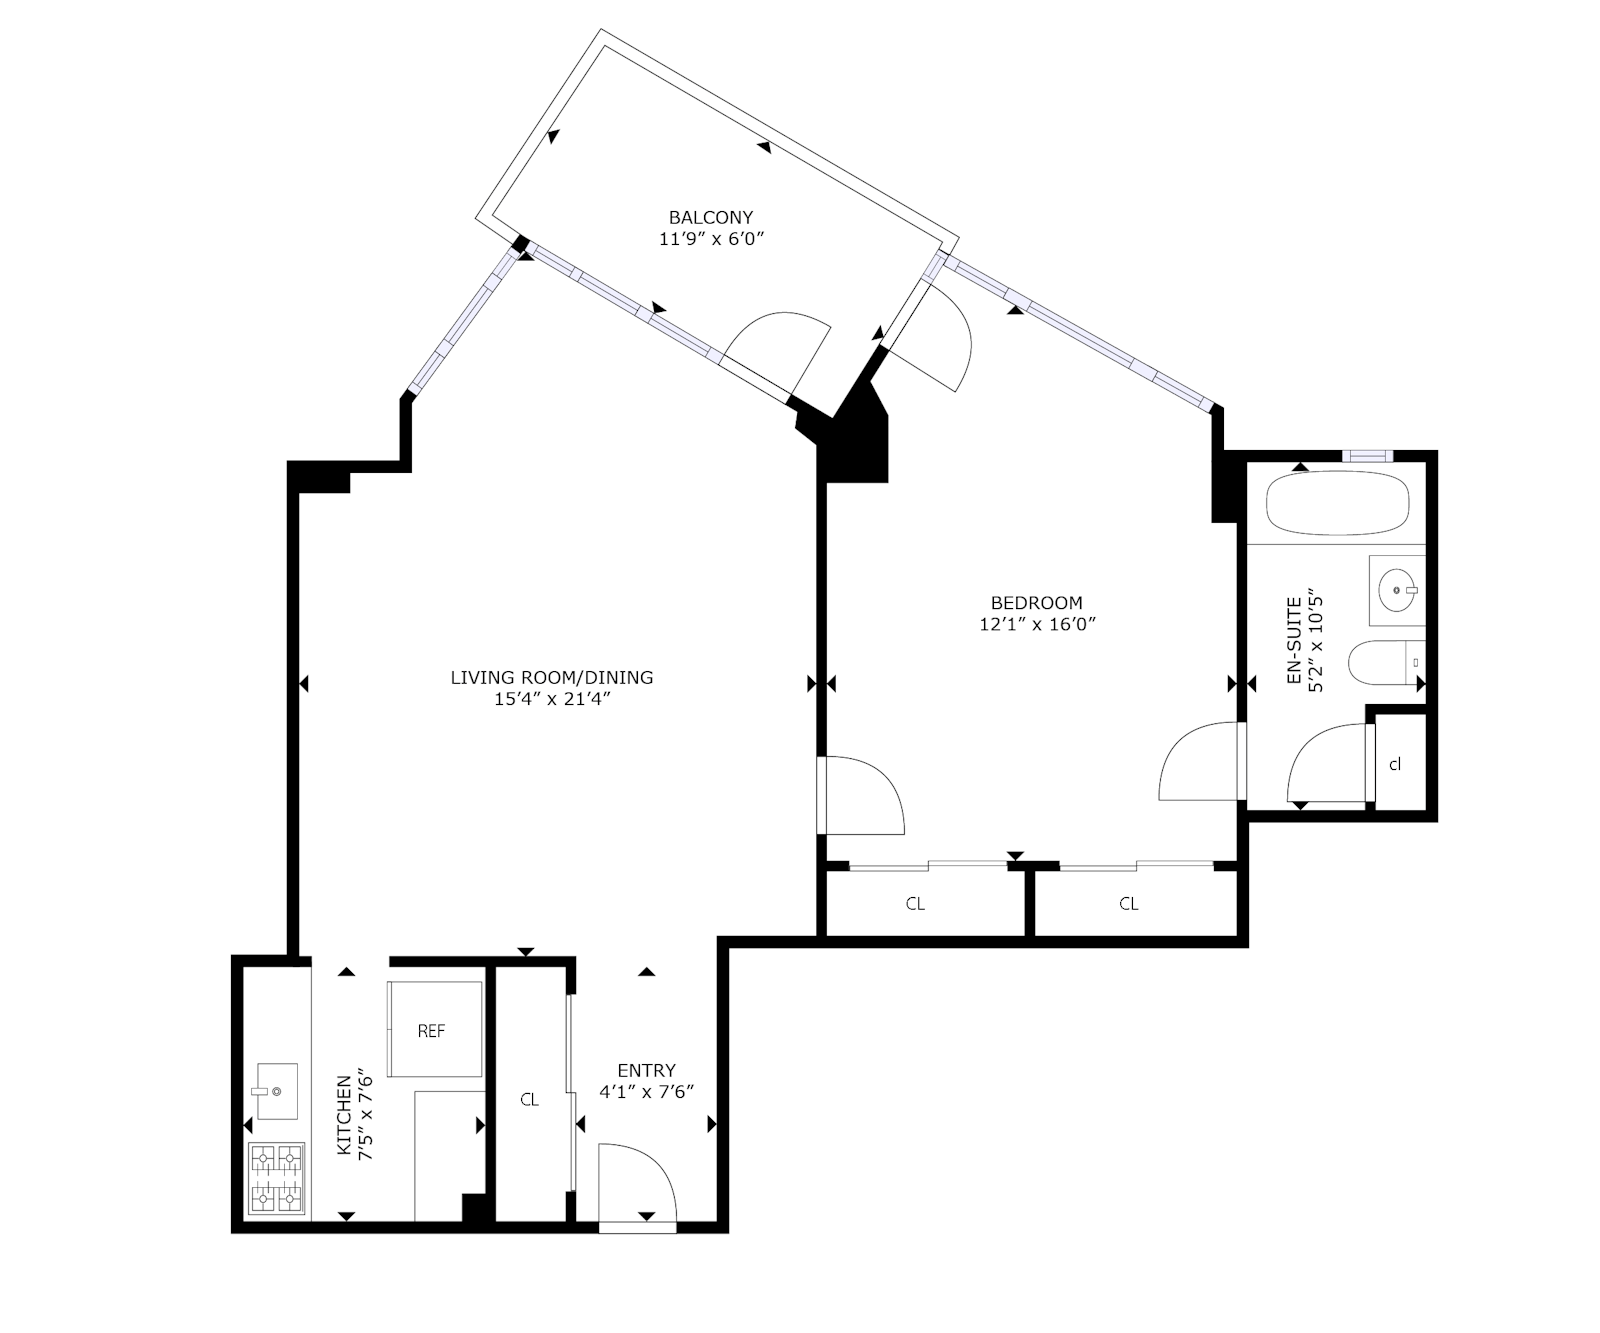 Floorplan for 60 Sutton Place South, 9FN